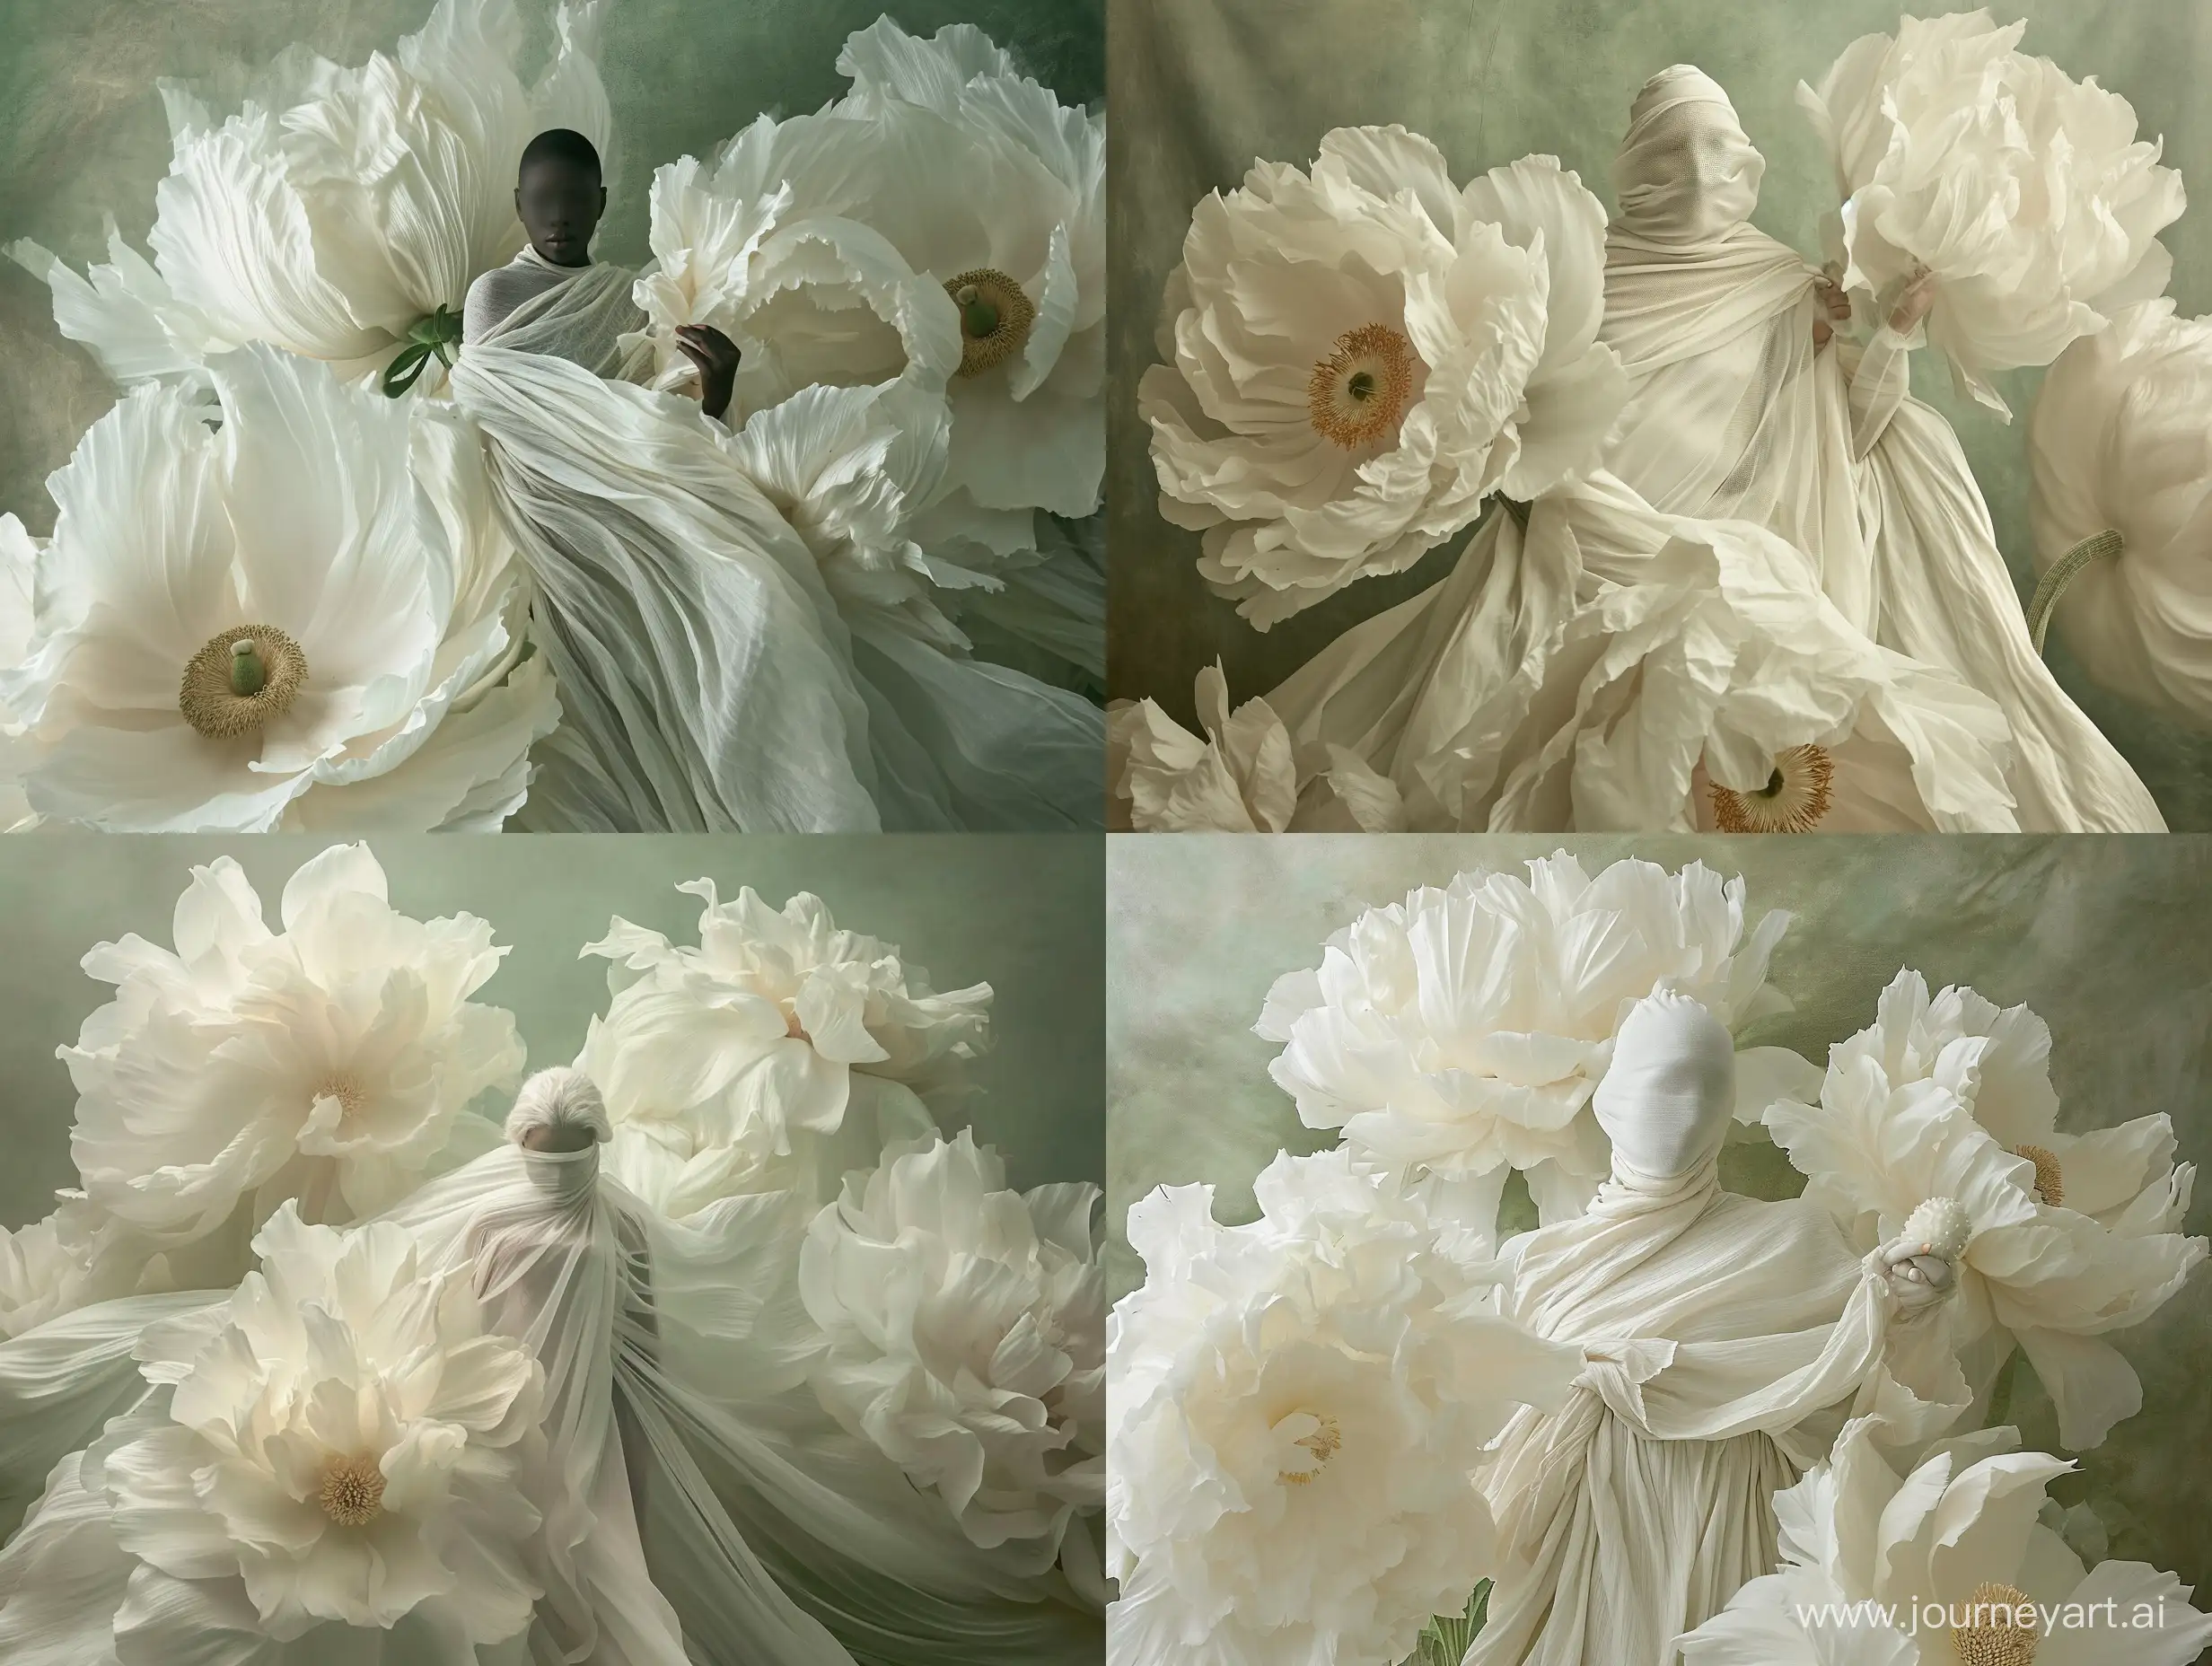 Ethereal-Serenity-Enigmatic-Figure-Amidst-White-Flowers